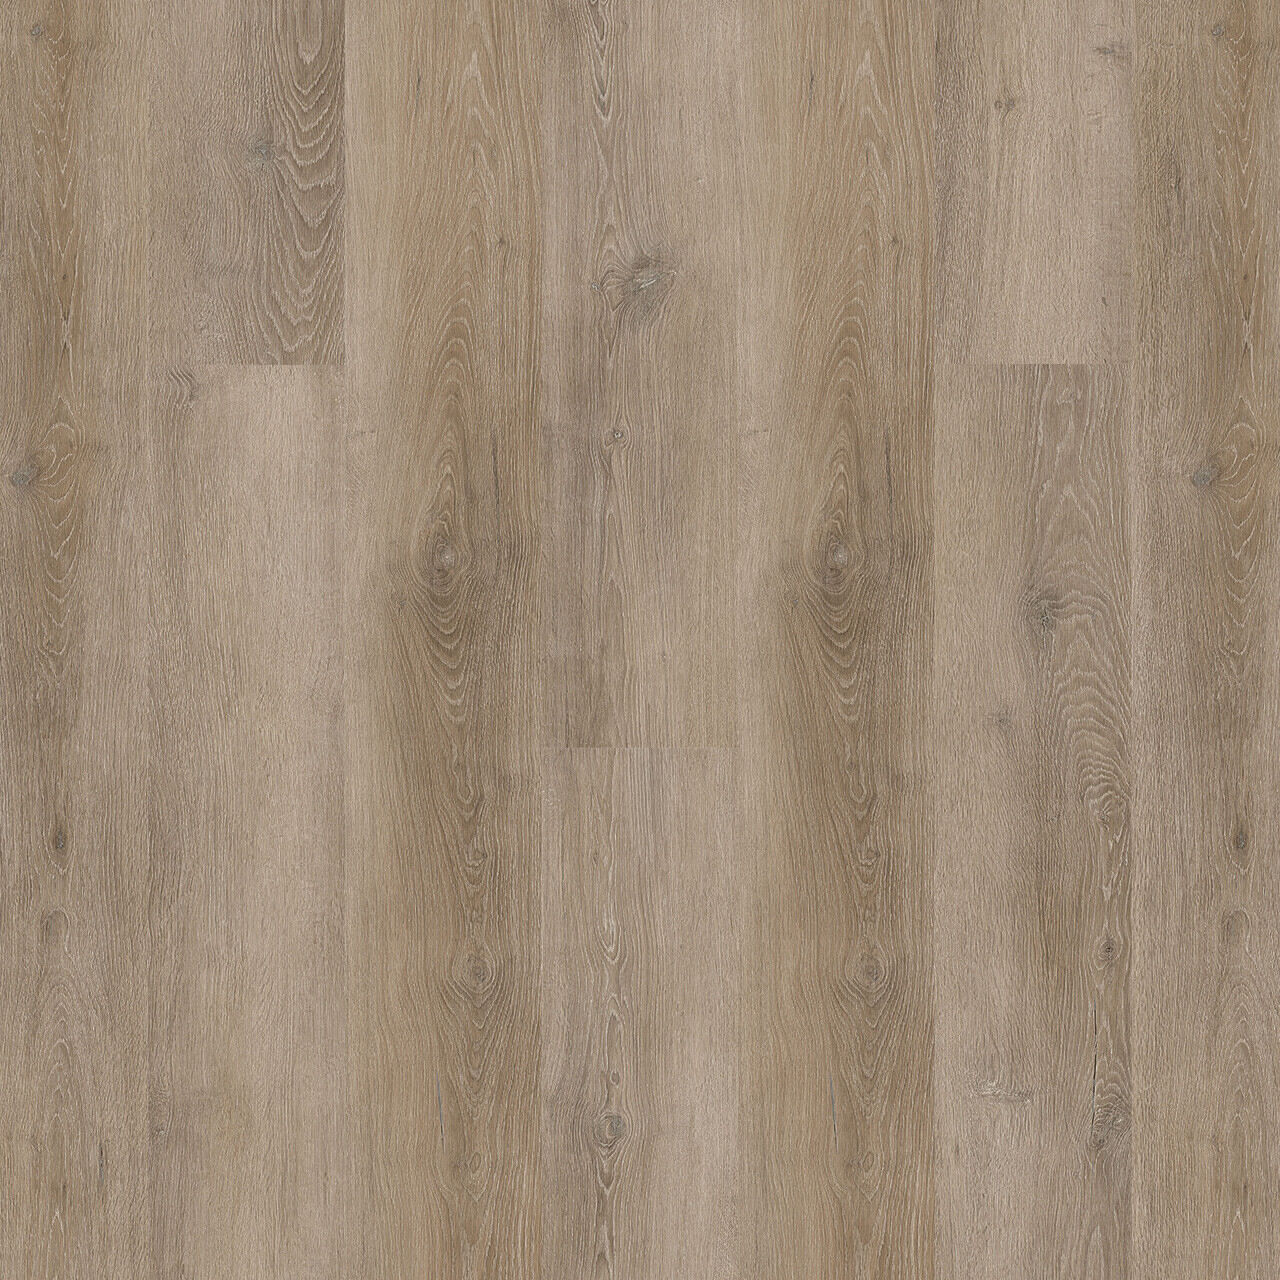 Engineered Floors - Triumph Collection - New Standard Plus - 7 in. x 48 in. - Druidstone